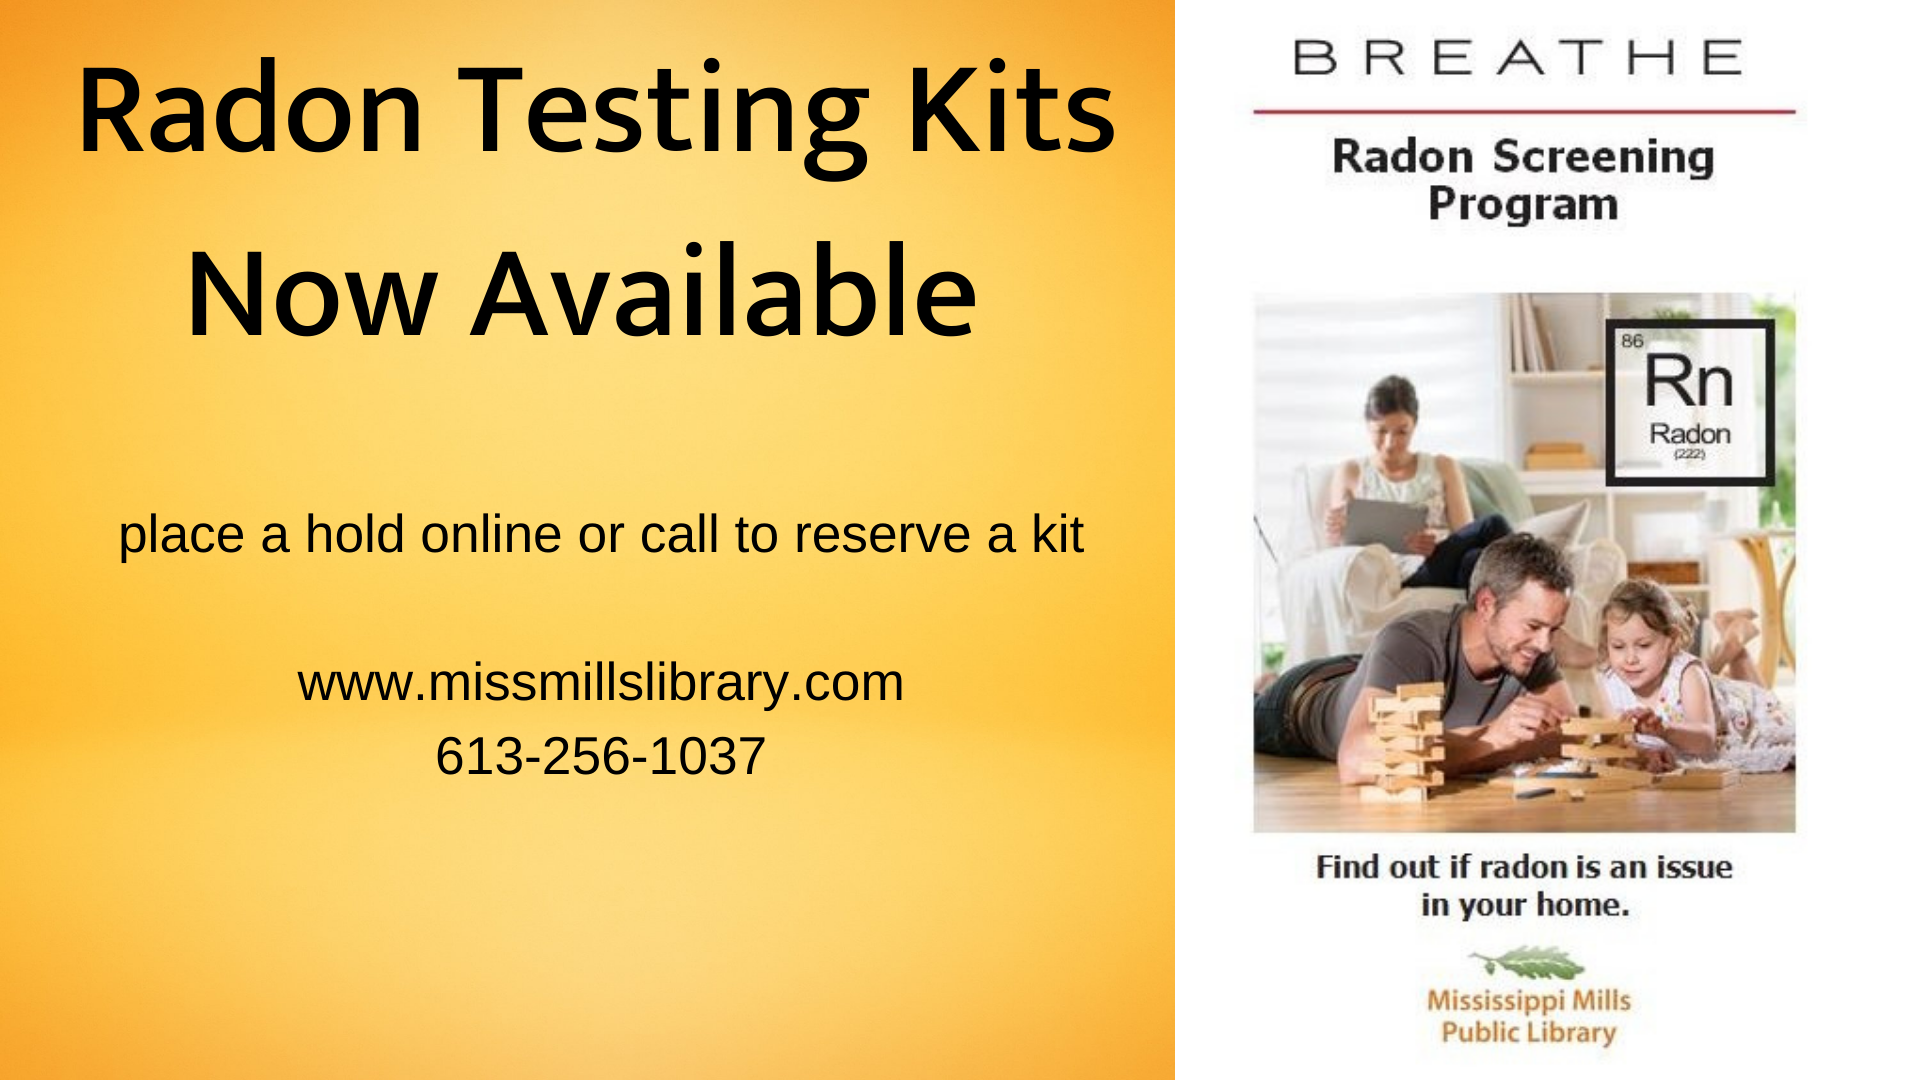 Radon Testing Kit Now Available. Place a hold online or call to reserve a kit. www.missmillslibrary.com 613-256-1037 BREATHE Radon Screening Program Find out if radon is an issue in your home.